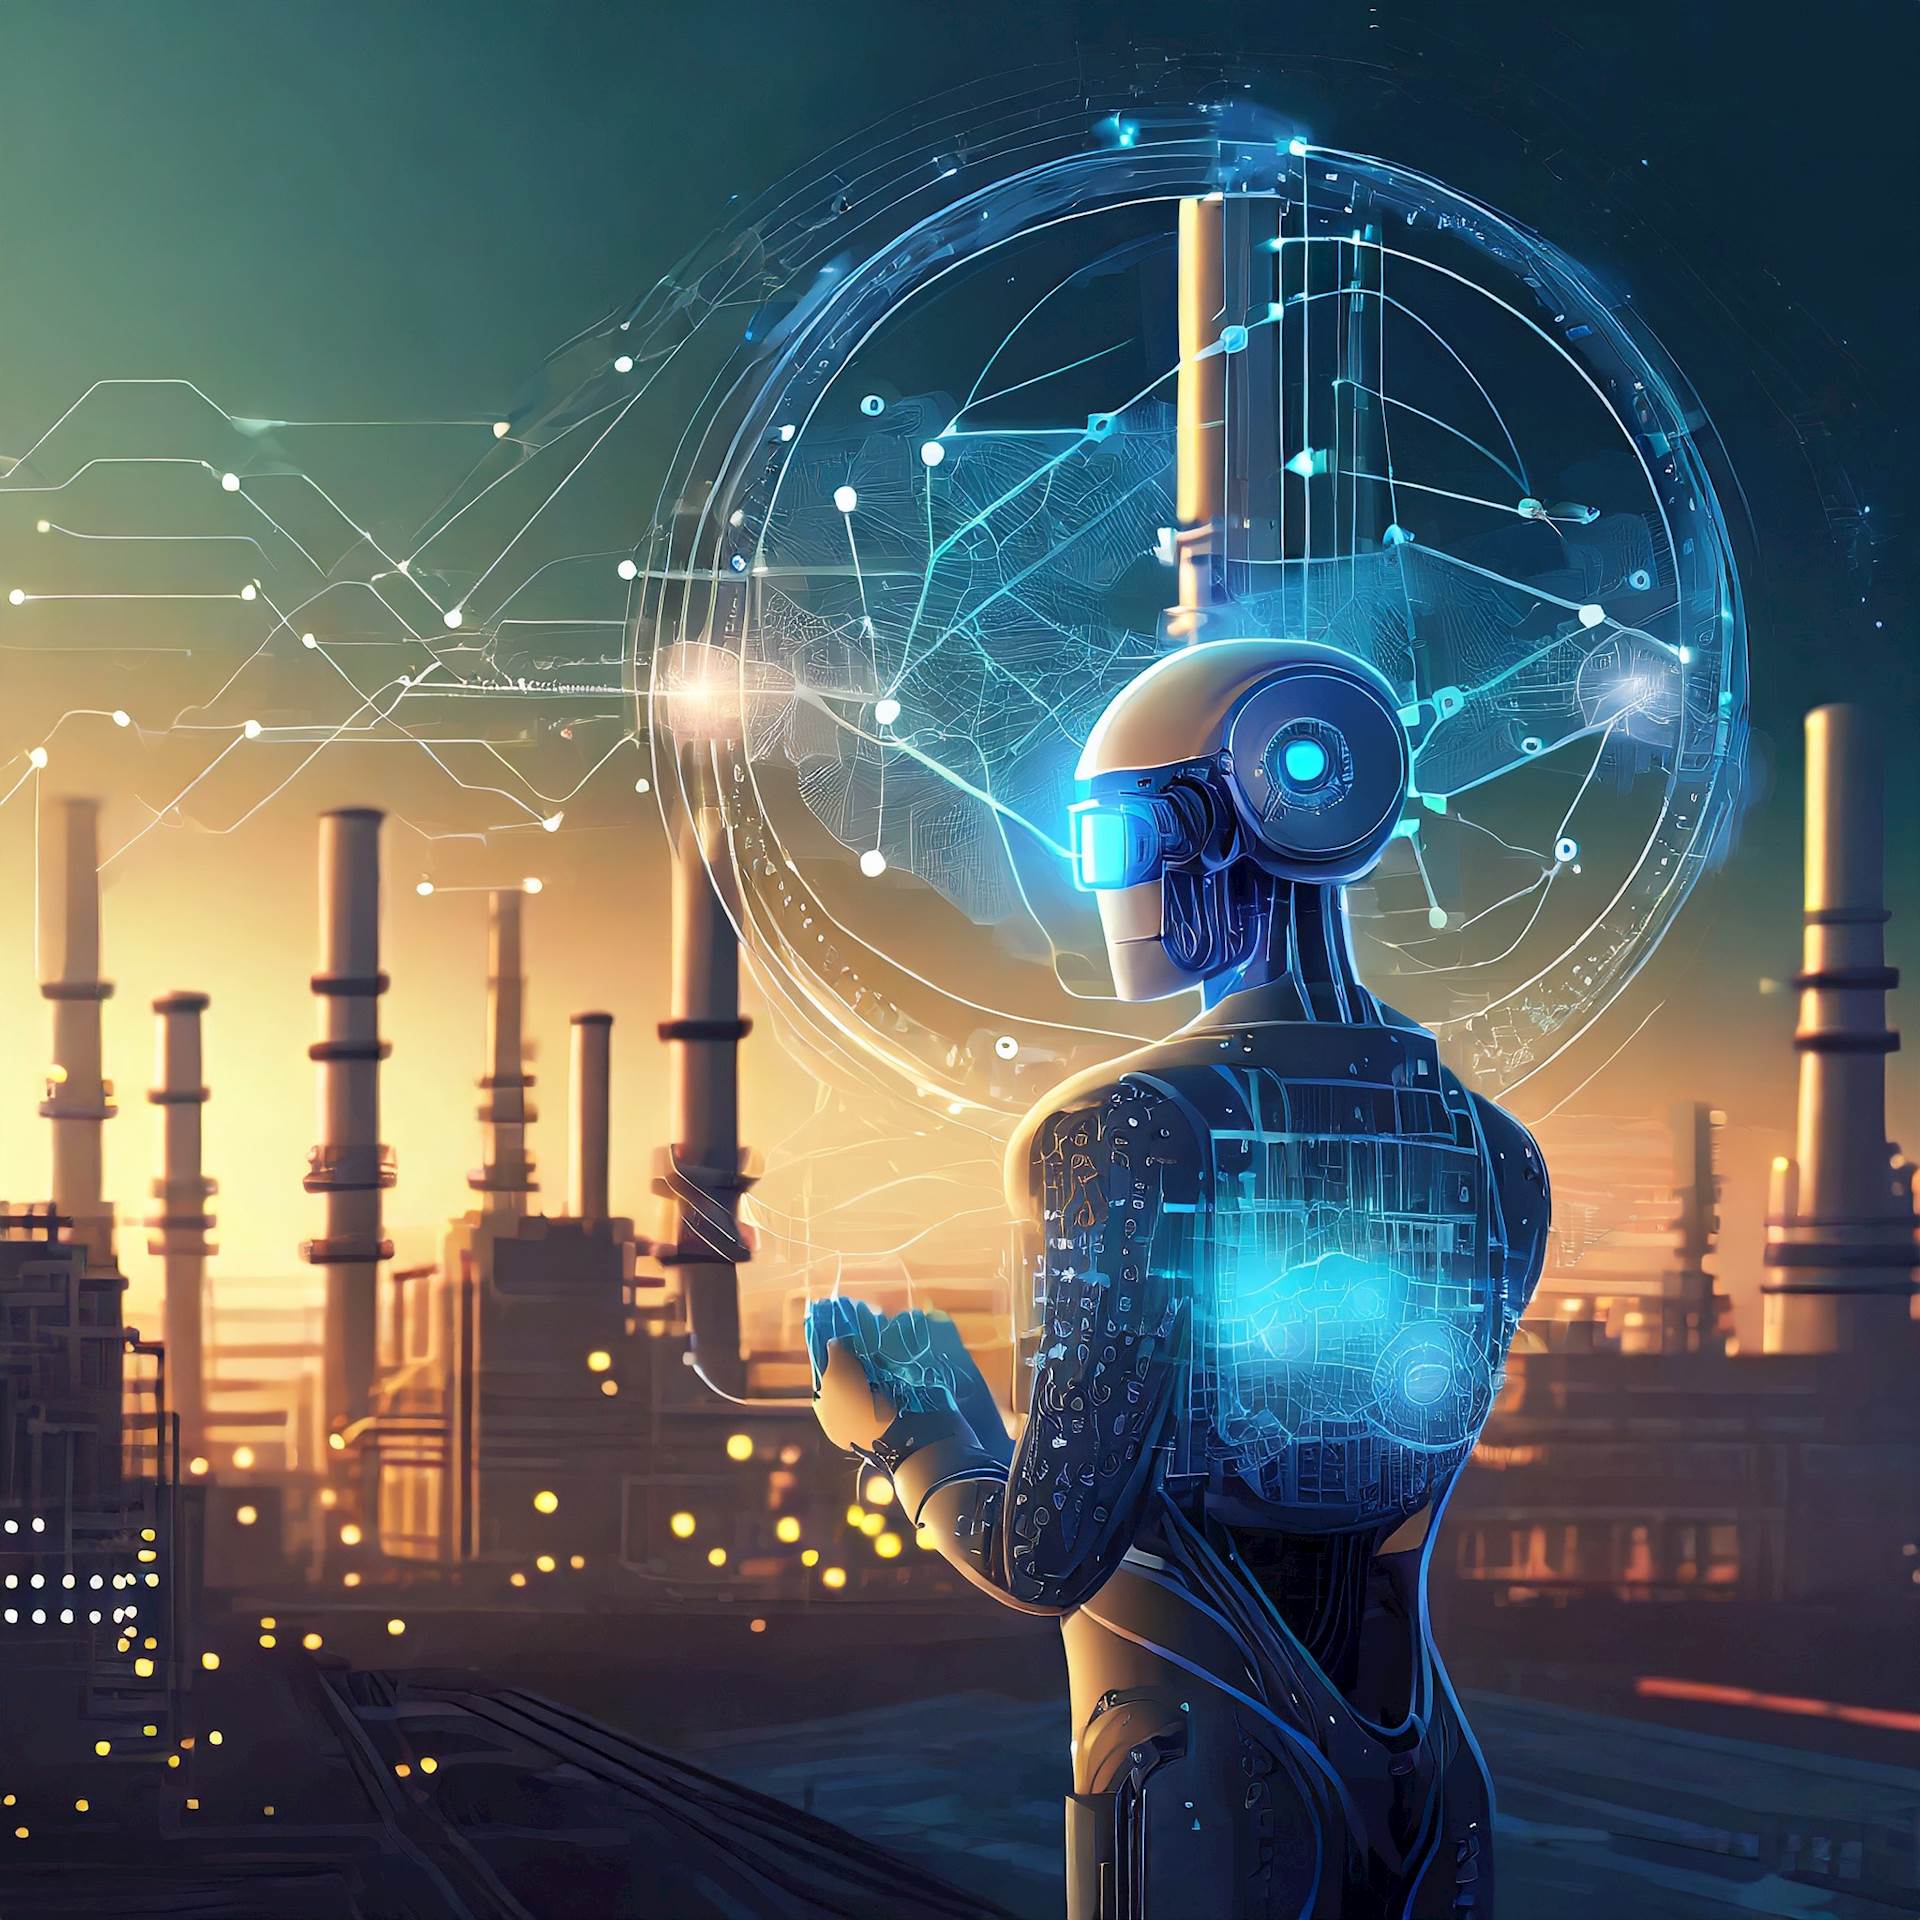 An artificial intelligence-generated illustration of a robot holding its hands out in front of itself while projecting an image that looks like a map. The robot is looking toward buildings that are industrial in appearance.